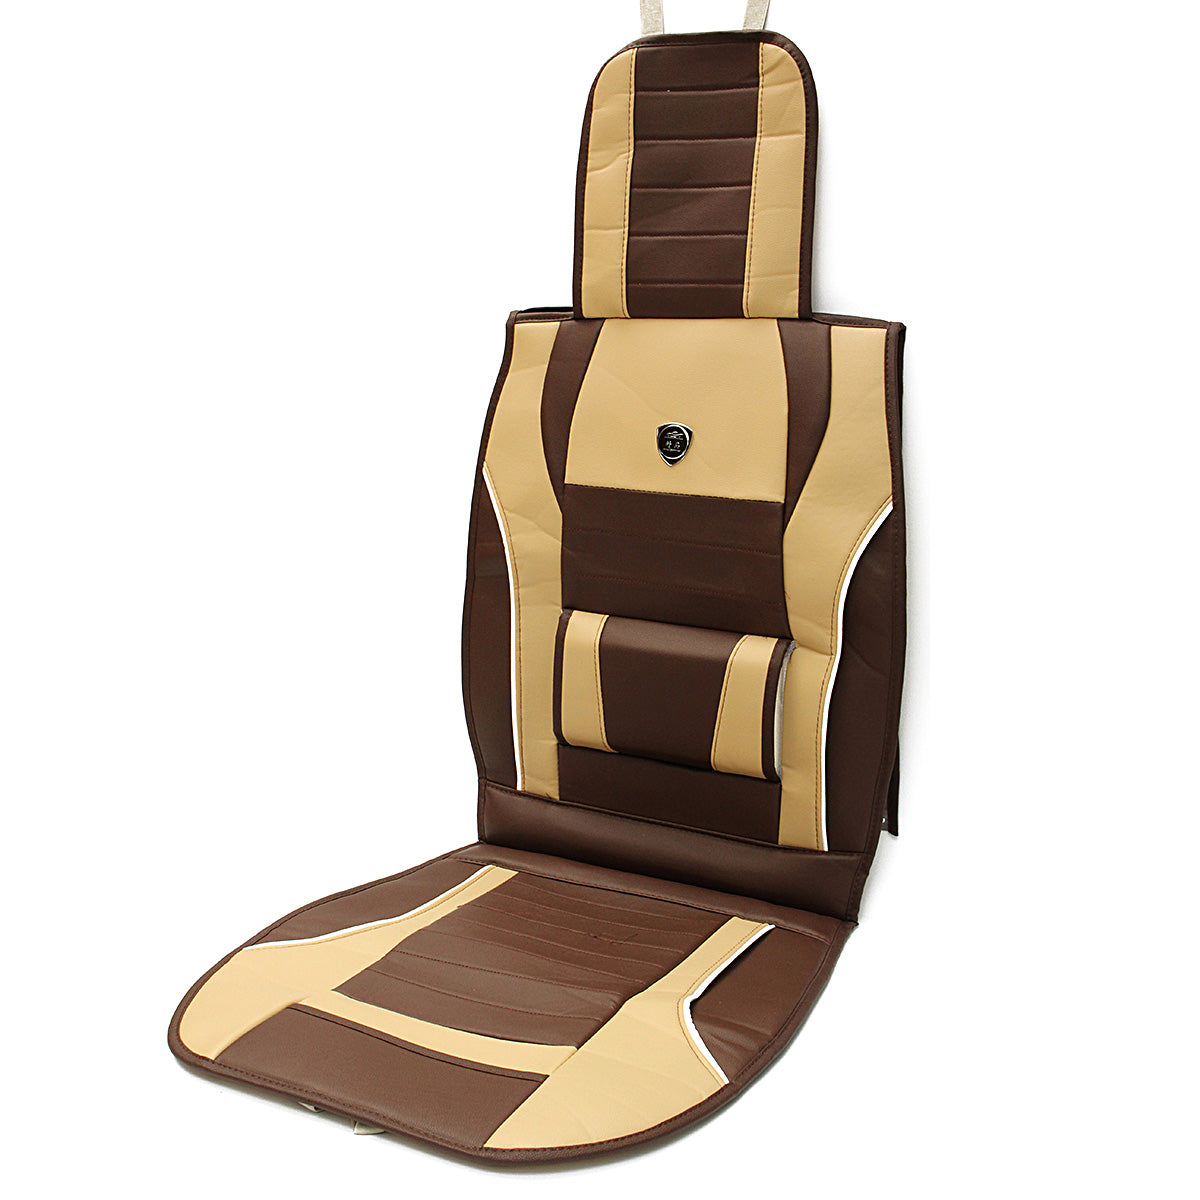 1Pcs PU Leather Car Front Seat Cover Support Cushion Pad Full Surround 7-Seat Universal - Auto GoShop